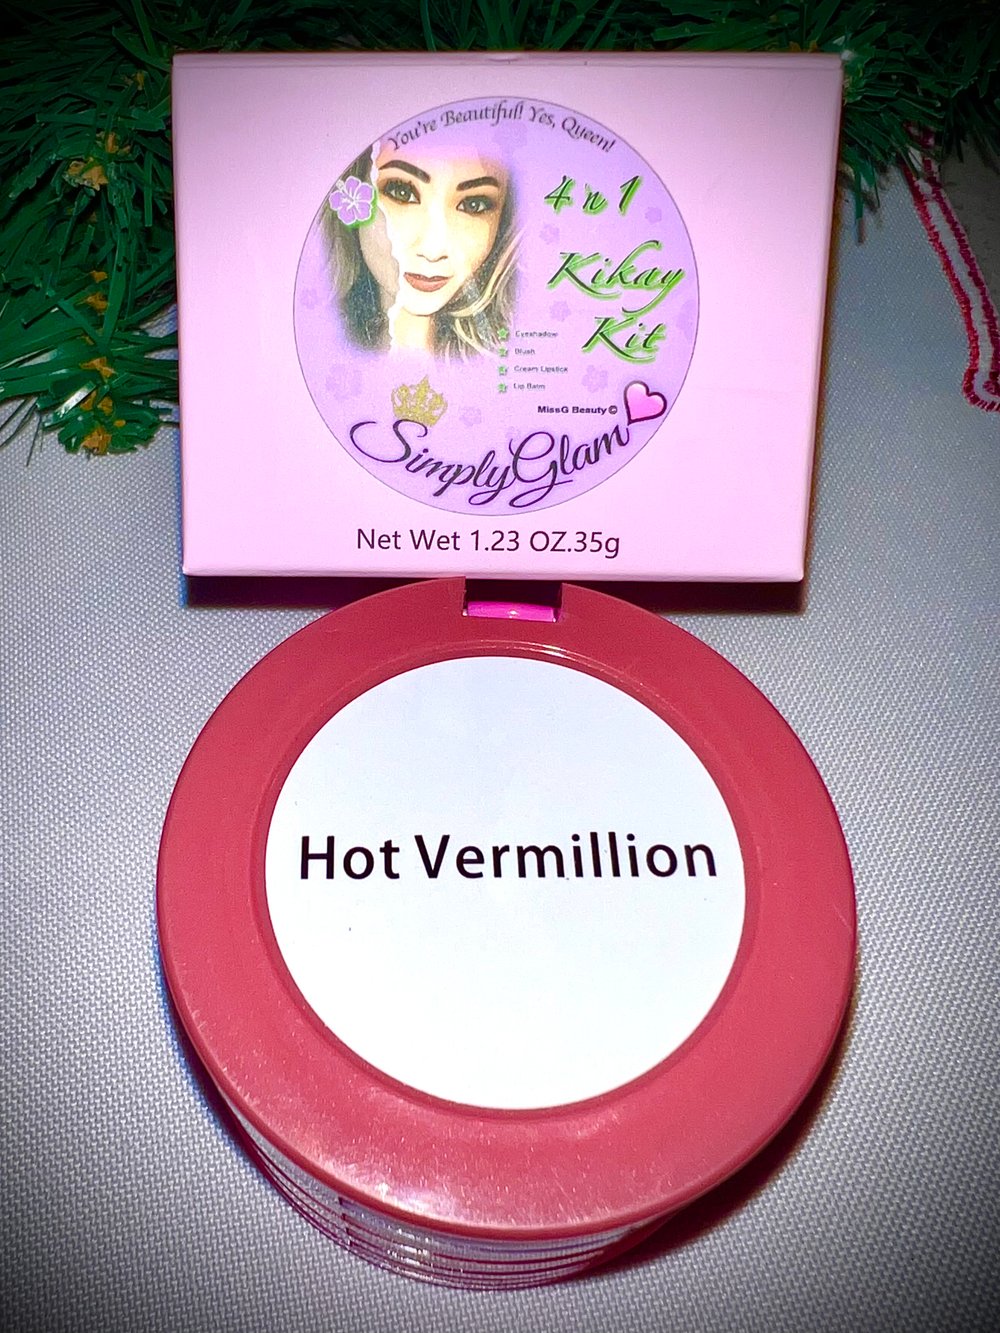 4in1 Hot Vermilion Kikay Kit Travel Beauty Compact 